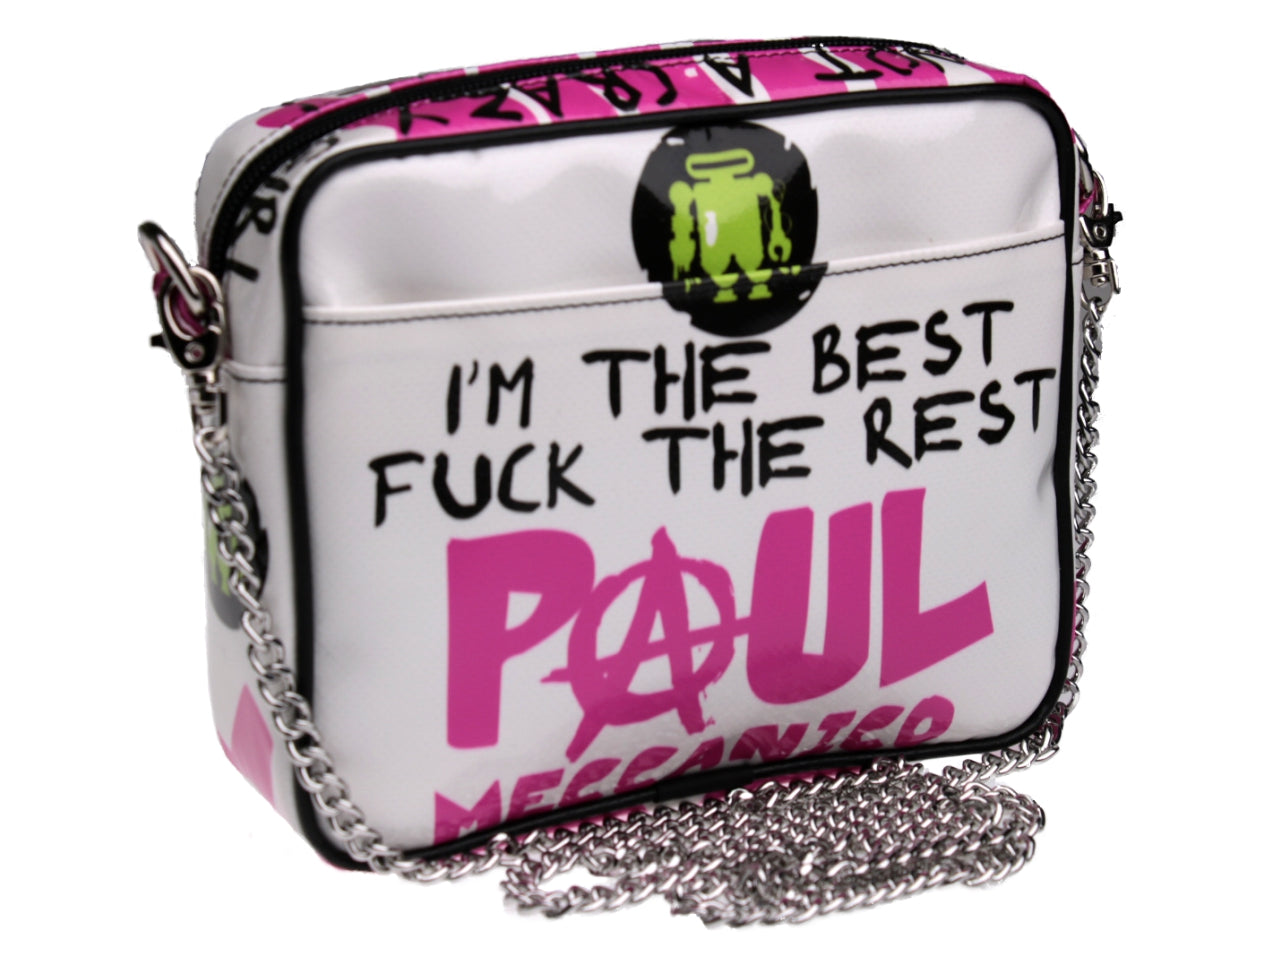 WHITE CLUTCH "I'M THE BEST, FUCK THE REST". PARK MODEL MADE OF LORRY TARPAULIN. - Limited Edition Paul Meccanico